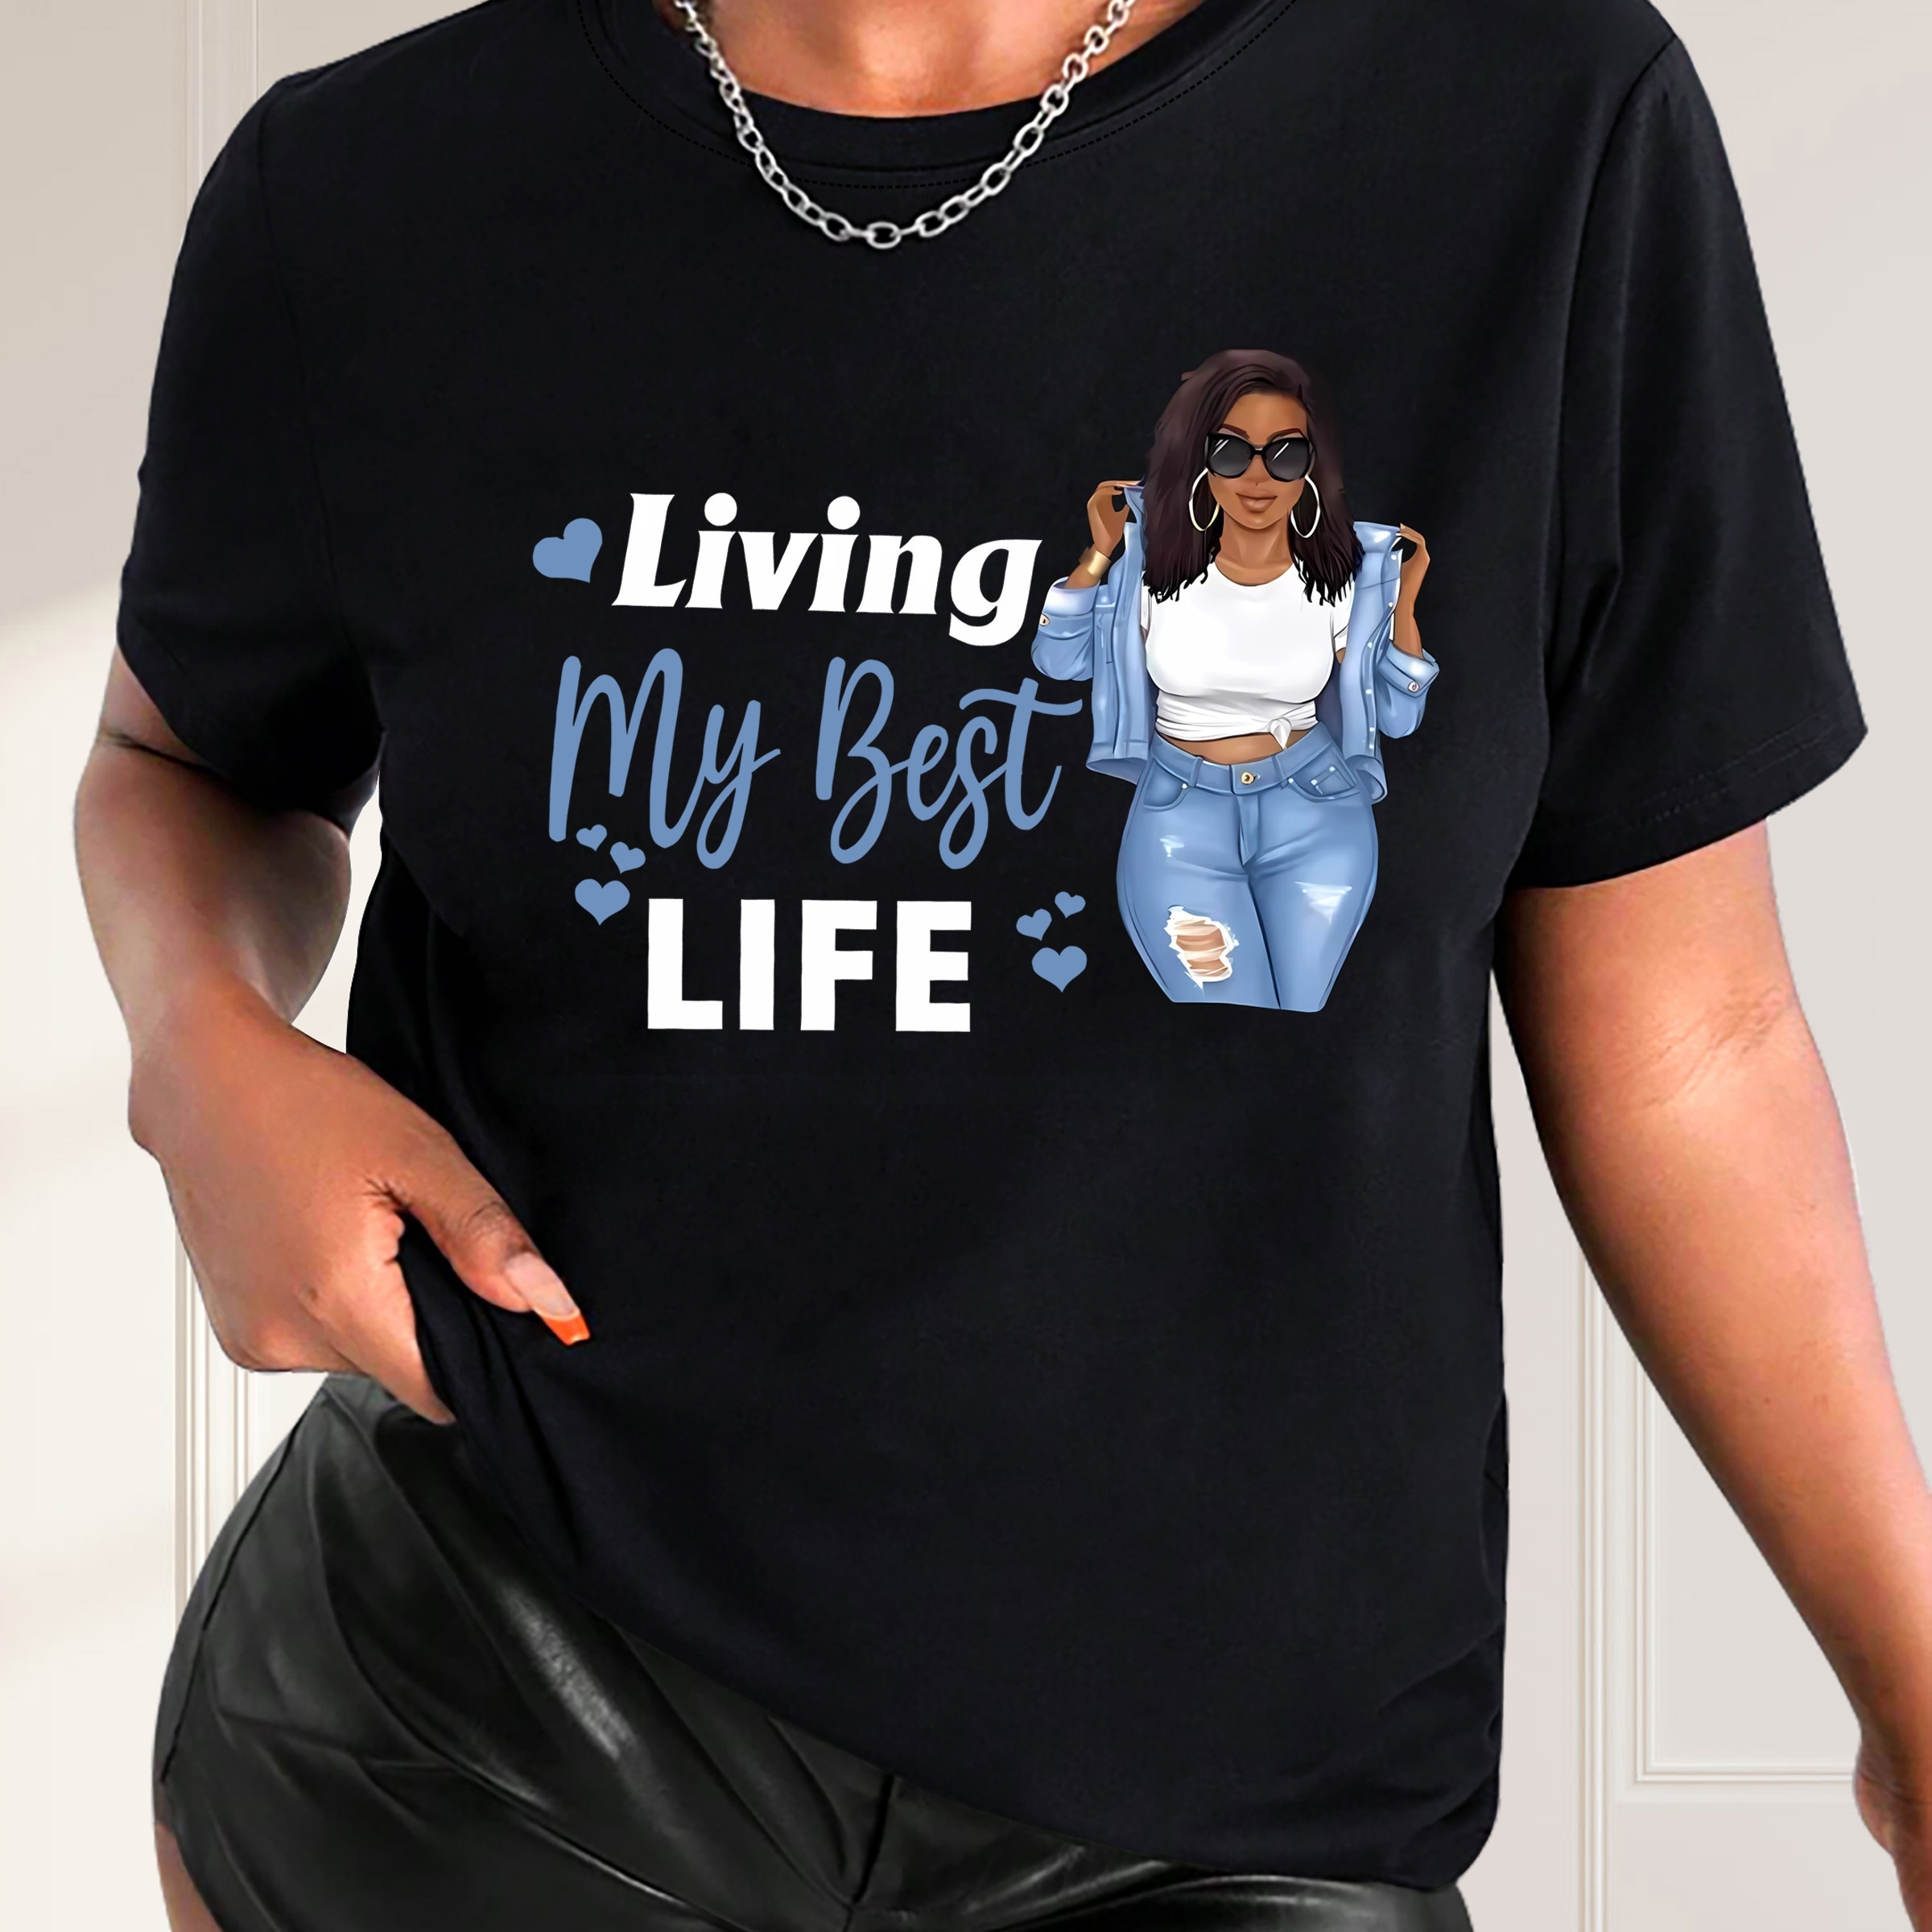 

Living My Best Life & Women Graphic Short Sleeves Sports Tee, Round Neck Workout Causal T-shirt Top, Women's Activewear